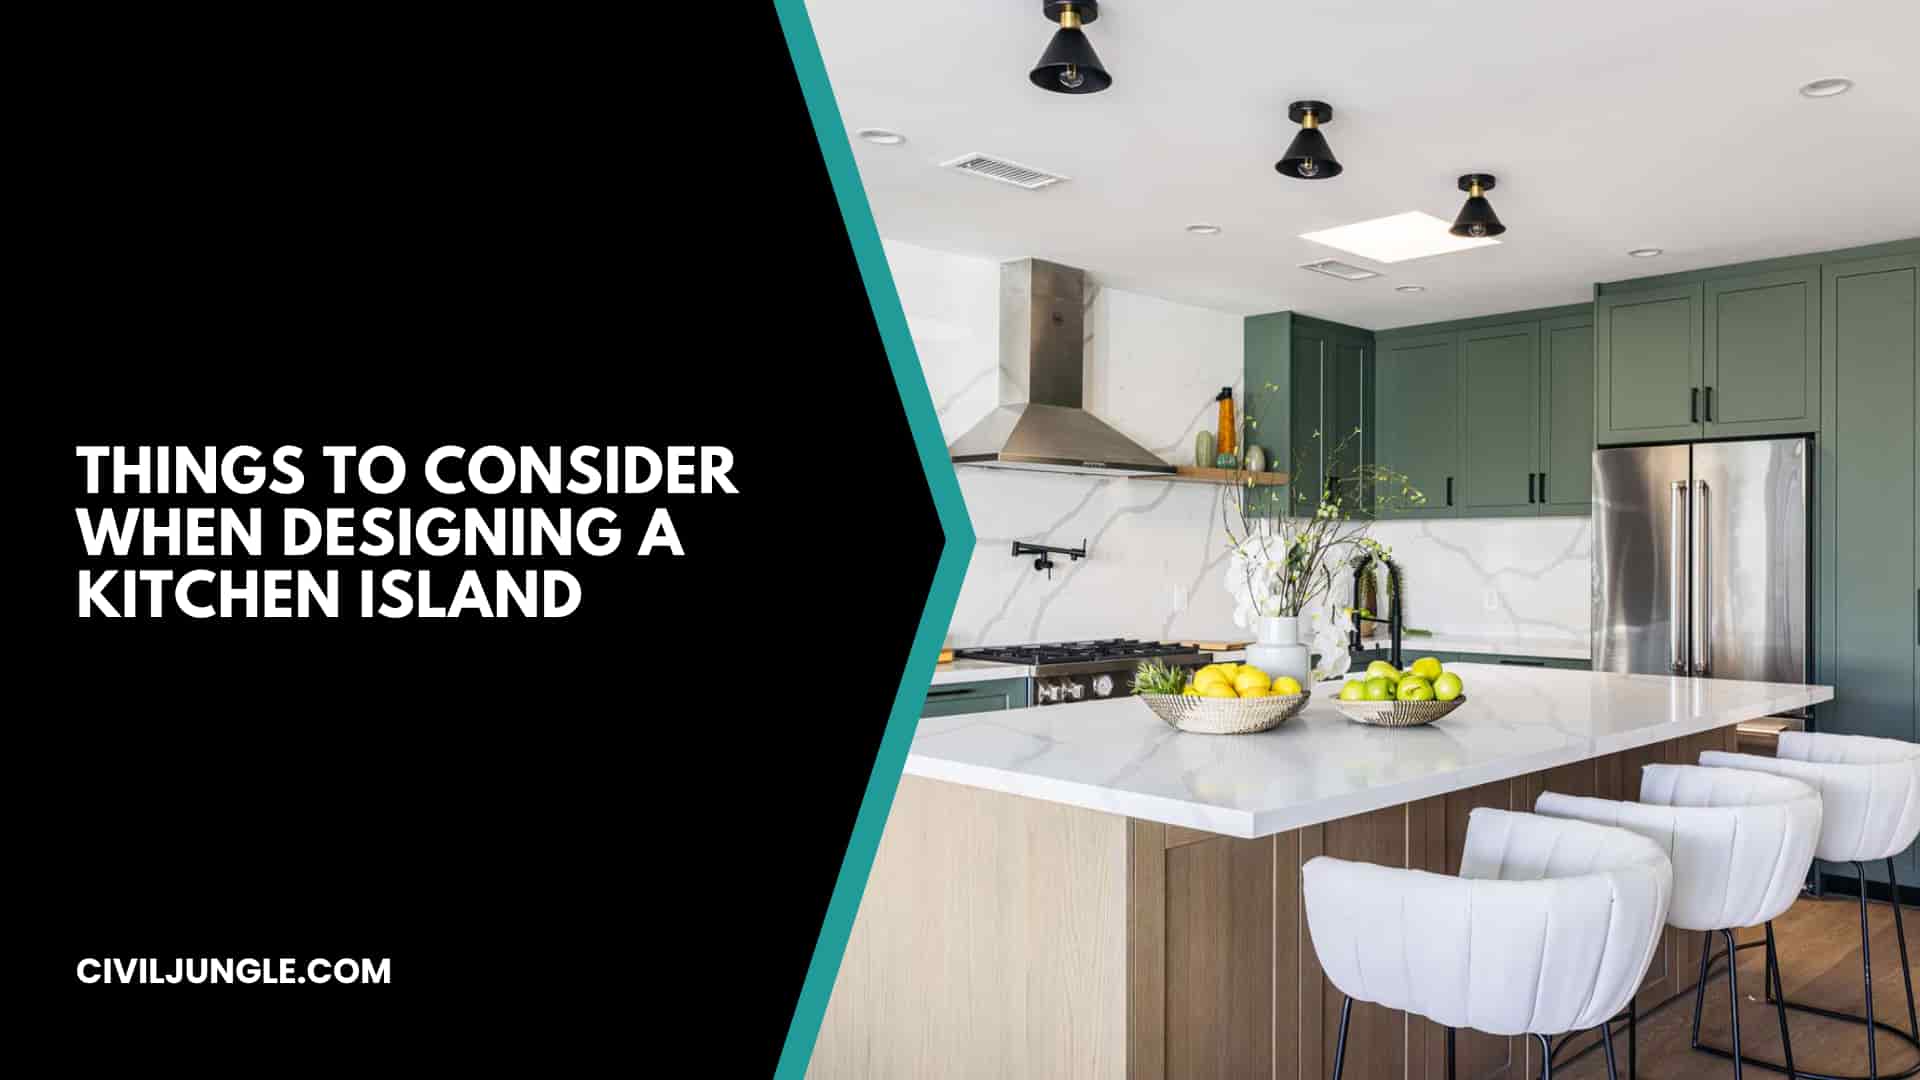 Things to Consider When Designing a Kitchen Island